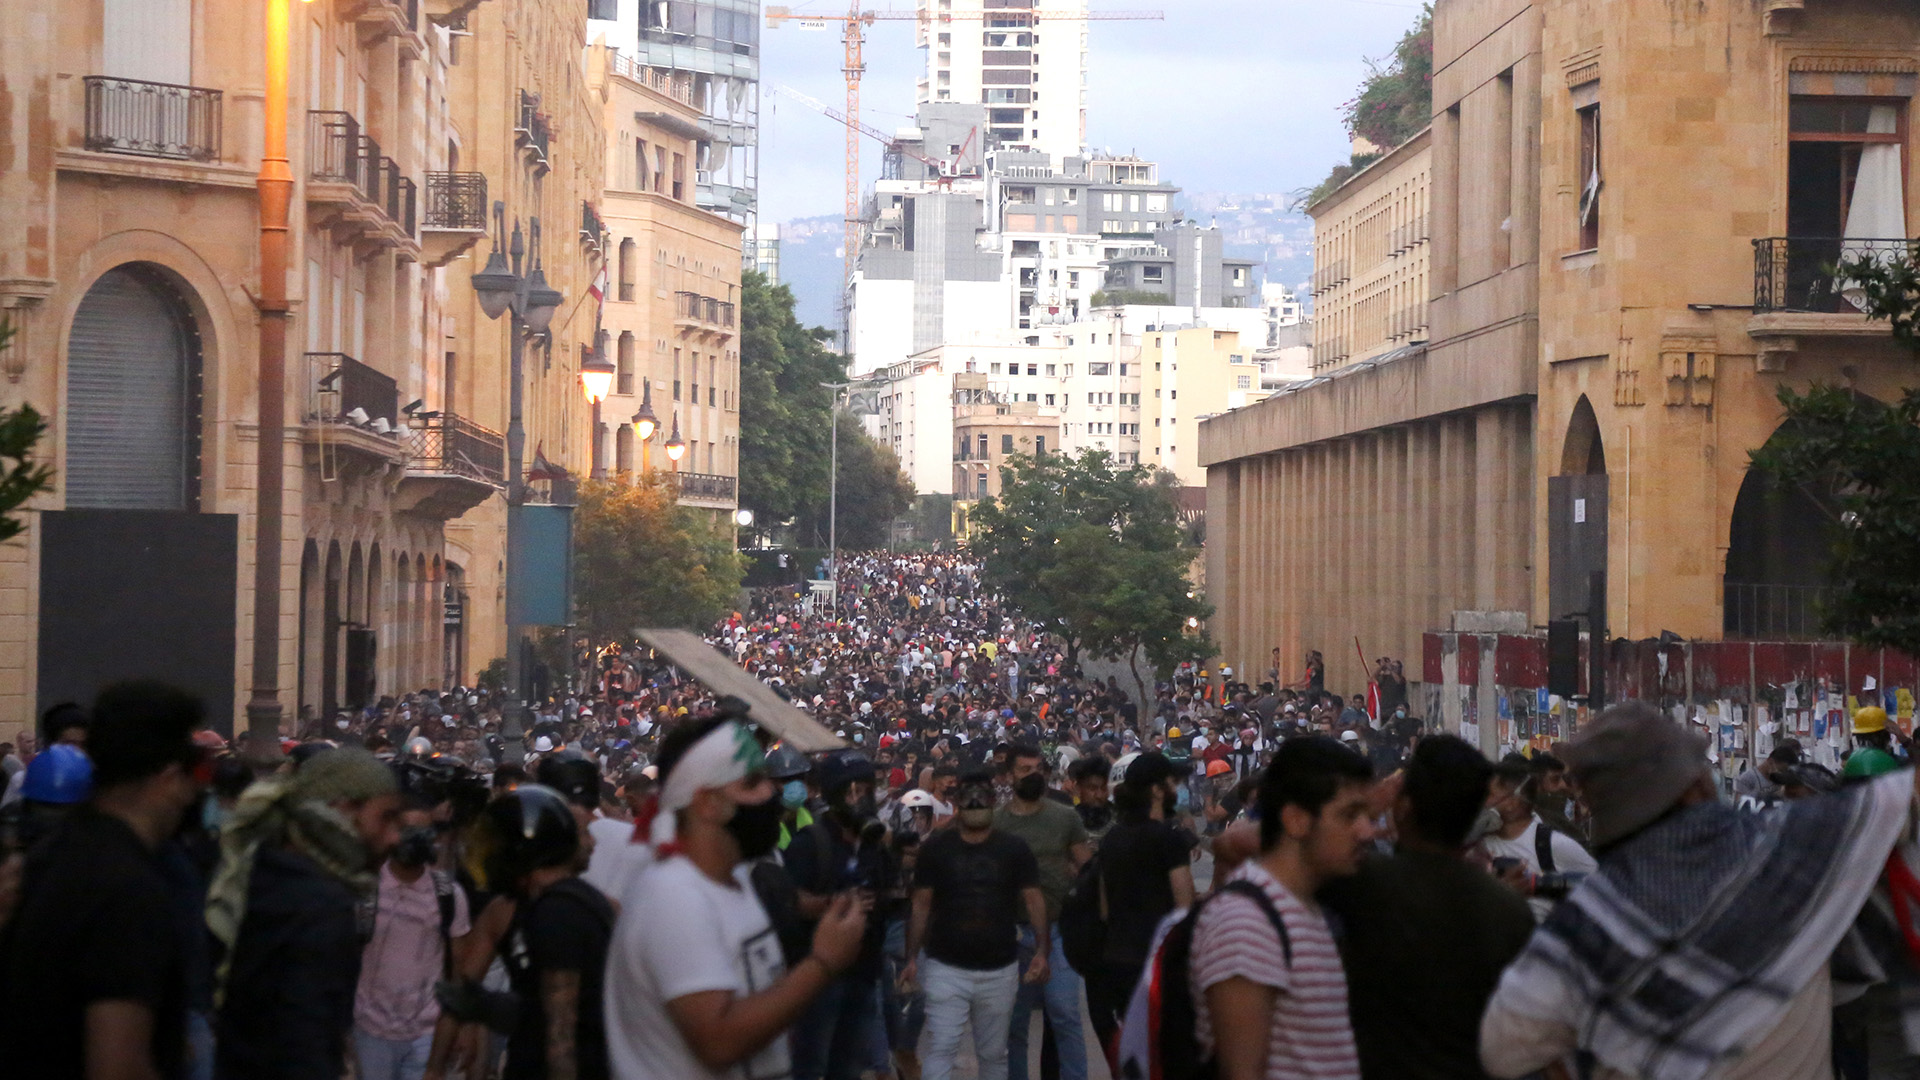 Revolution, protests and confrontations in Beirut, Lebanon